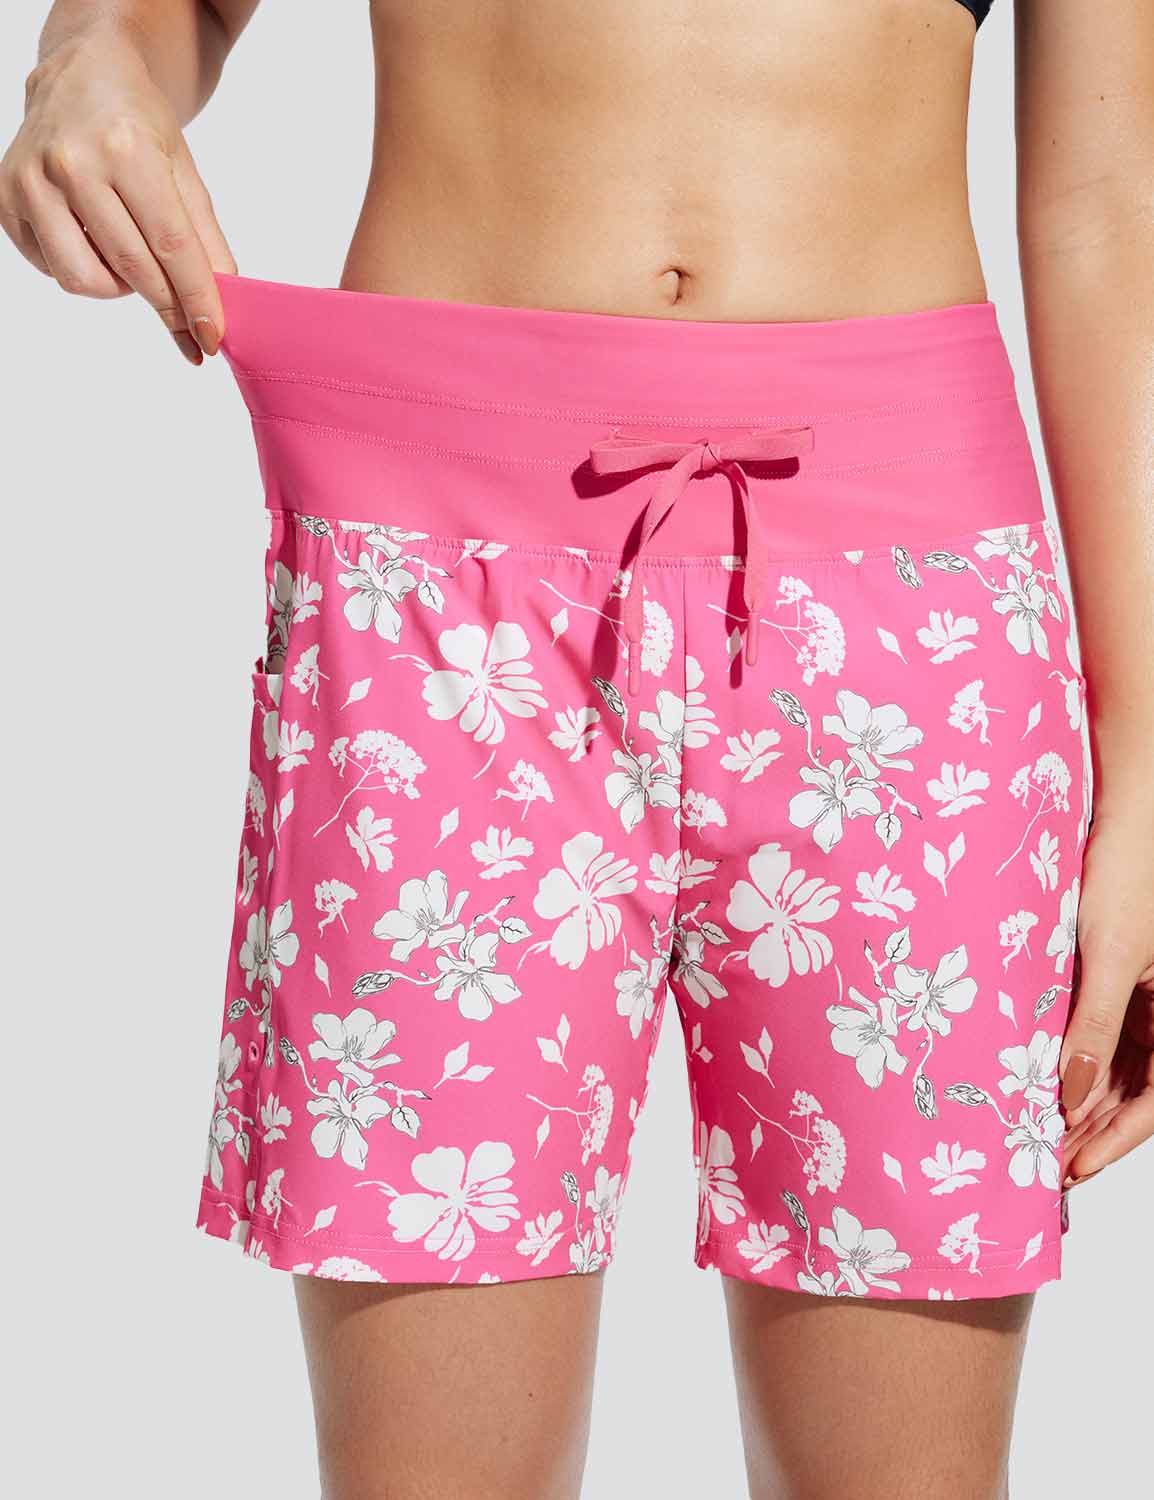 Baleaf Women's Wide Waistband Printed Quick-dry Swim Shorts Pink White Flowers Details